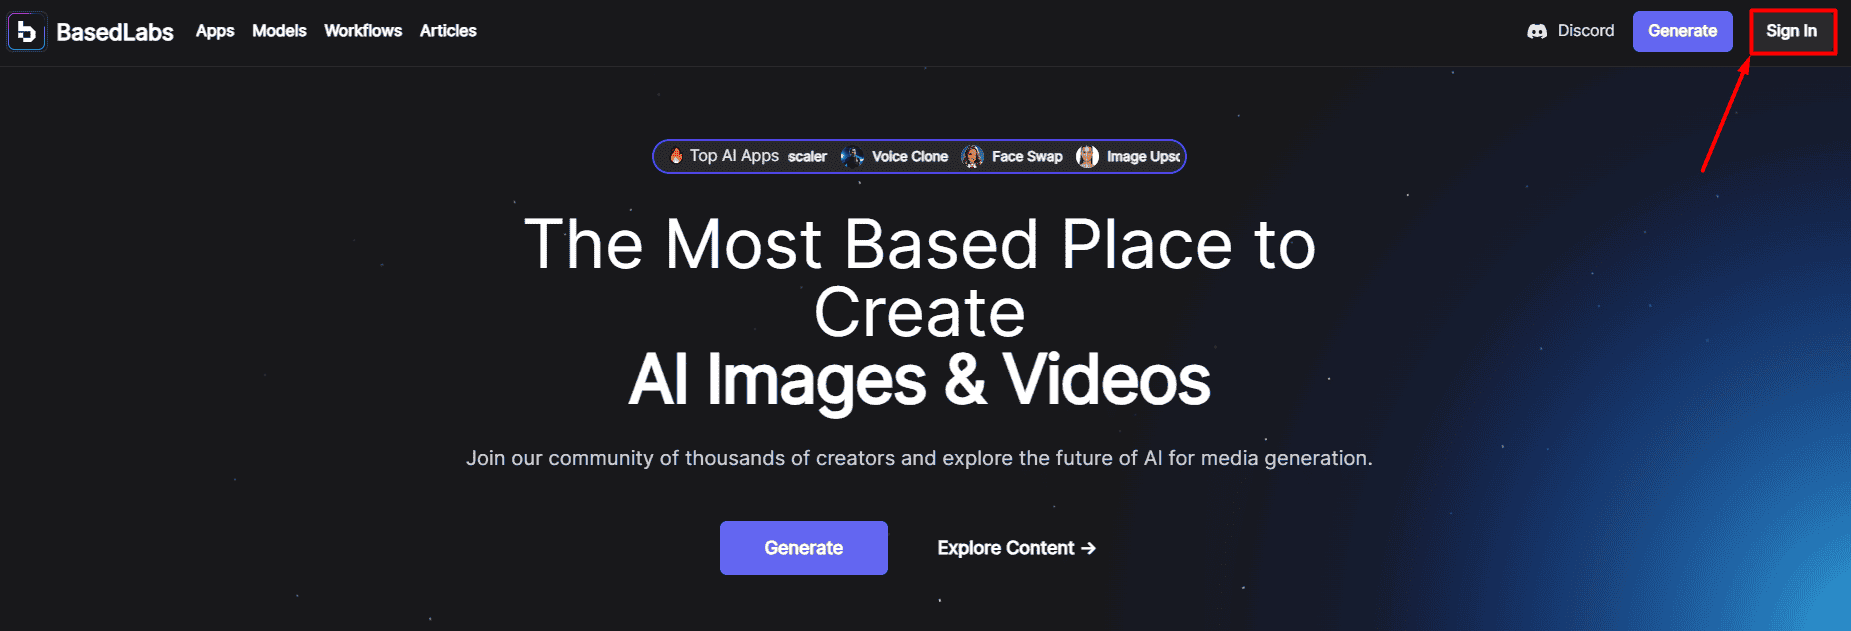 Based Labs AI tutorial sign in